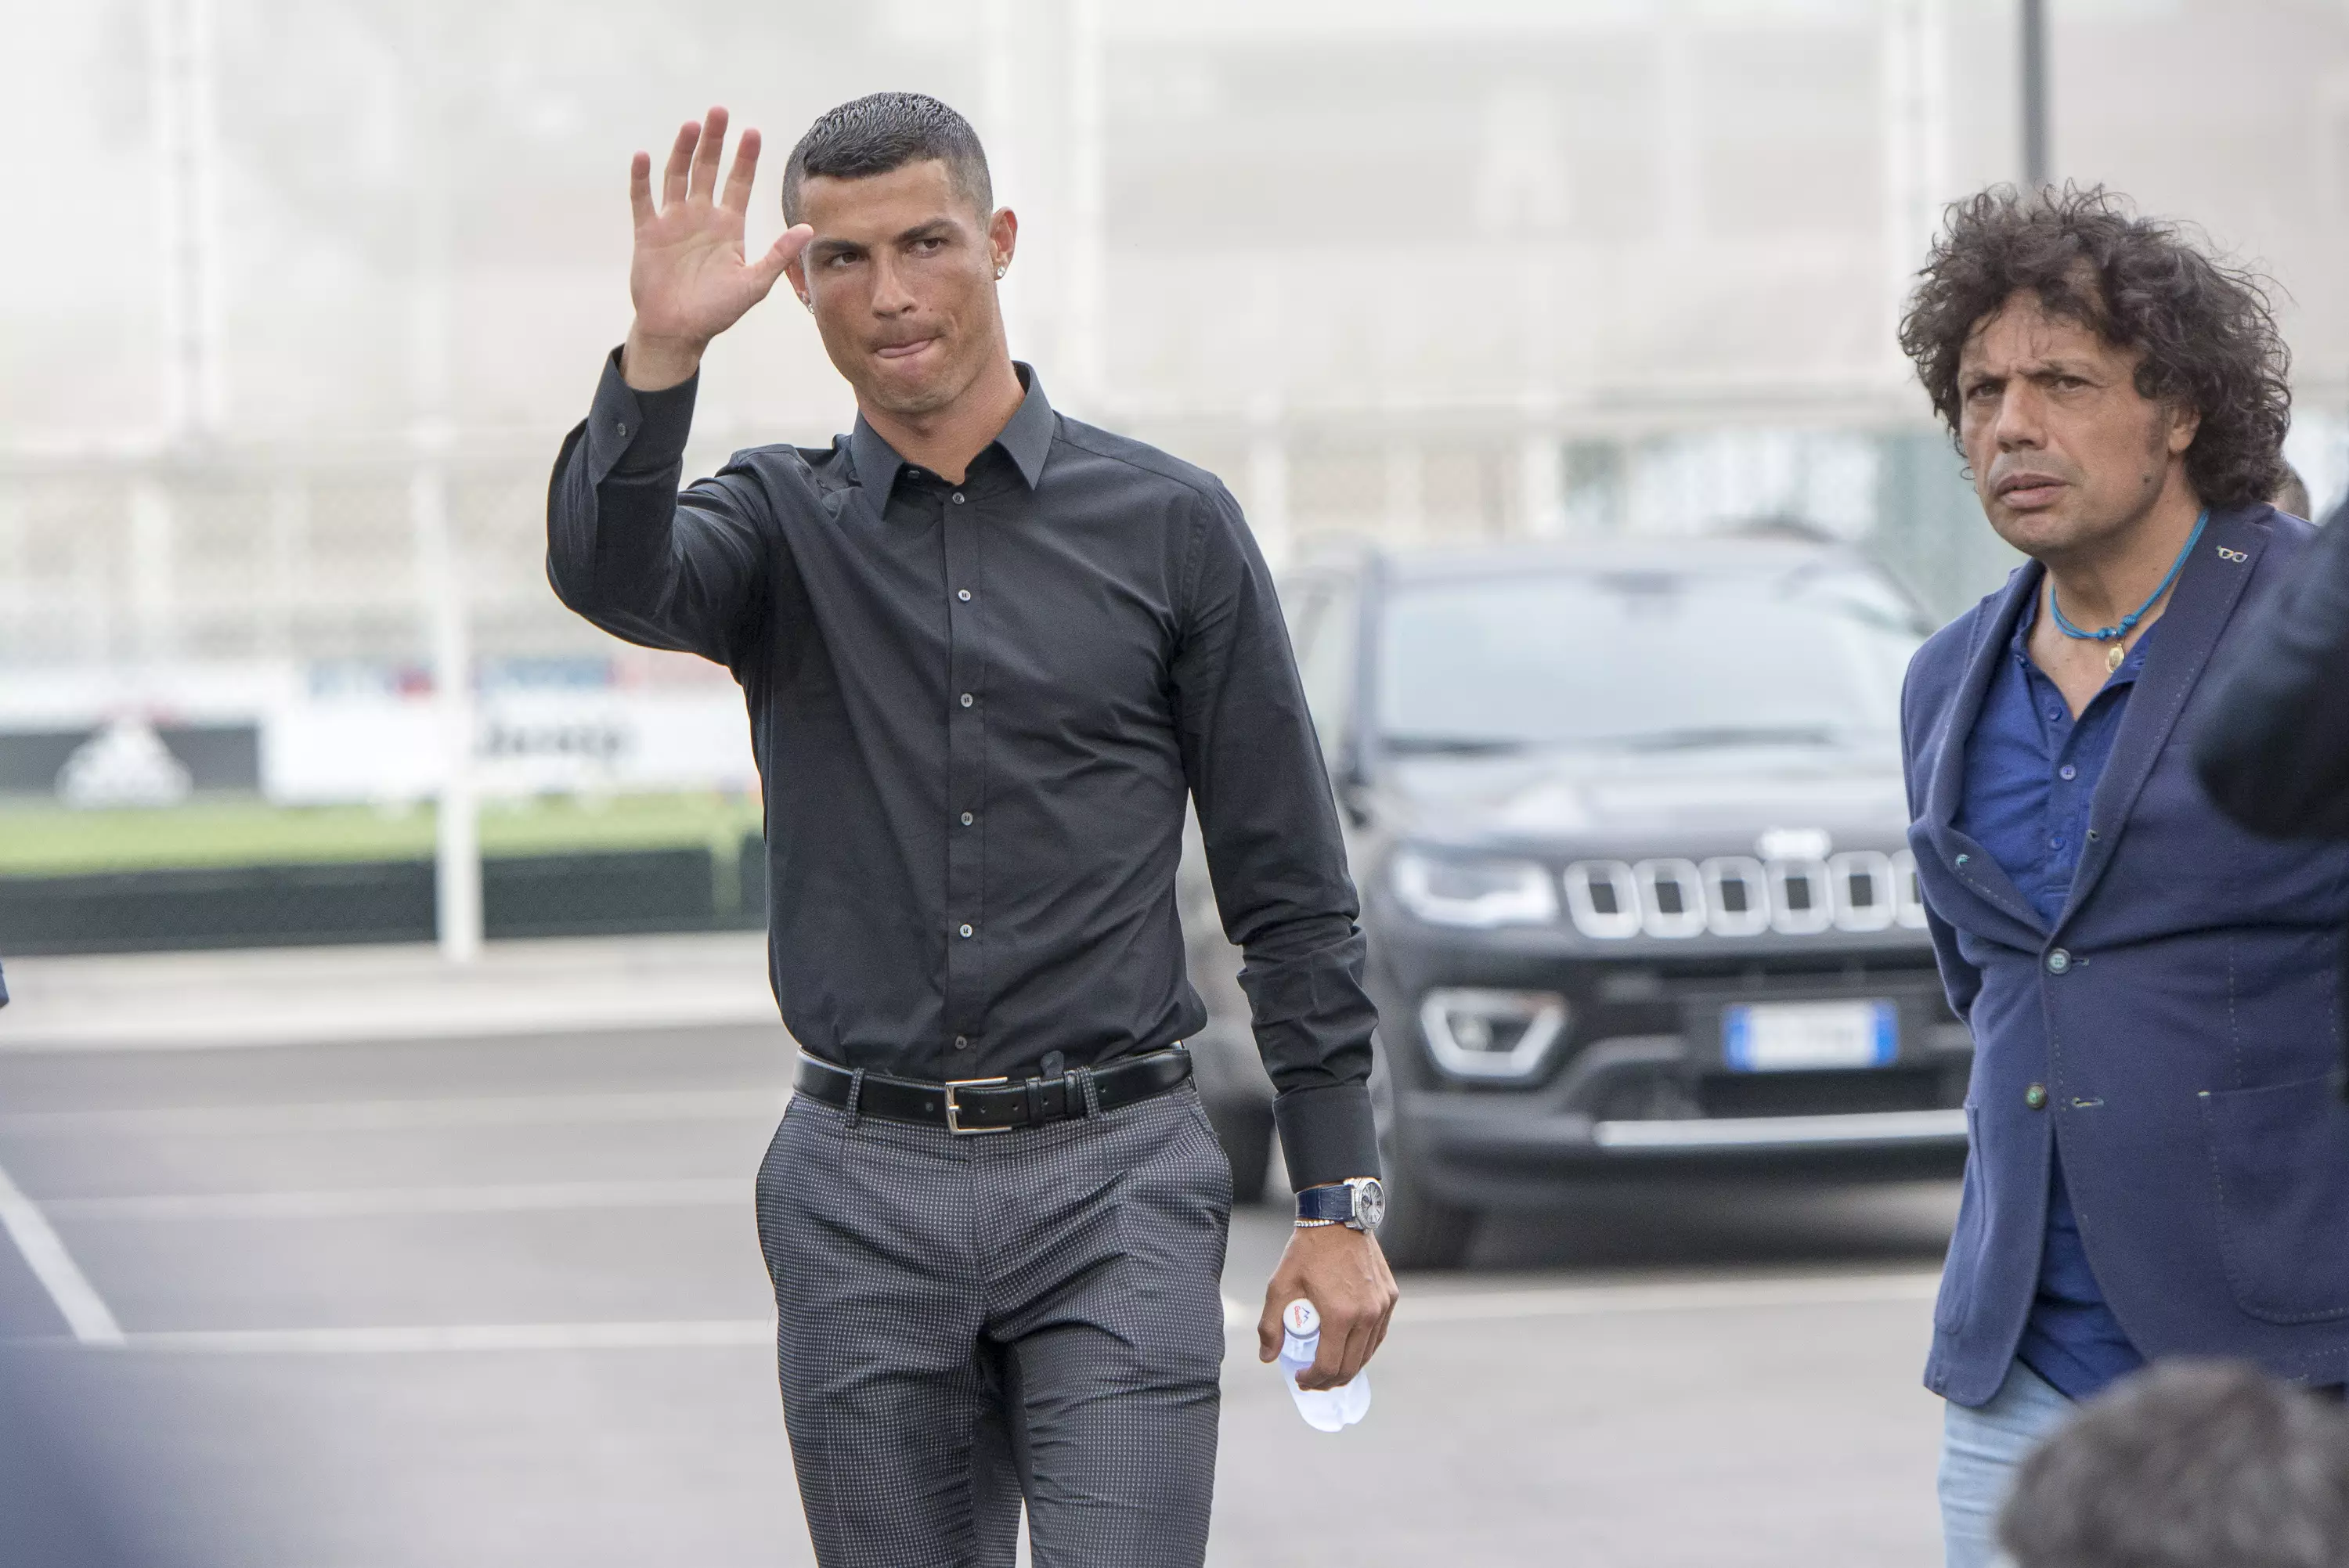 Ronaldo arriving in Turin to sign for Juventus. Image: PA Images